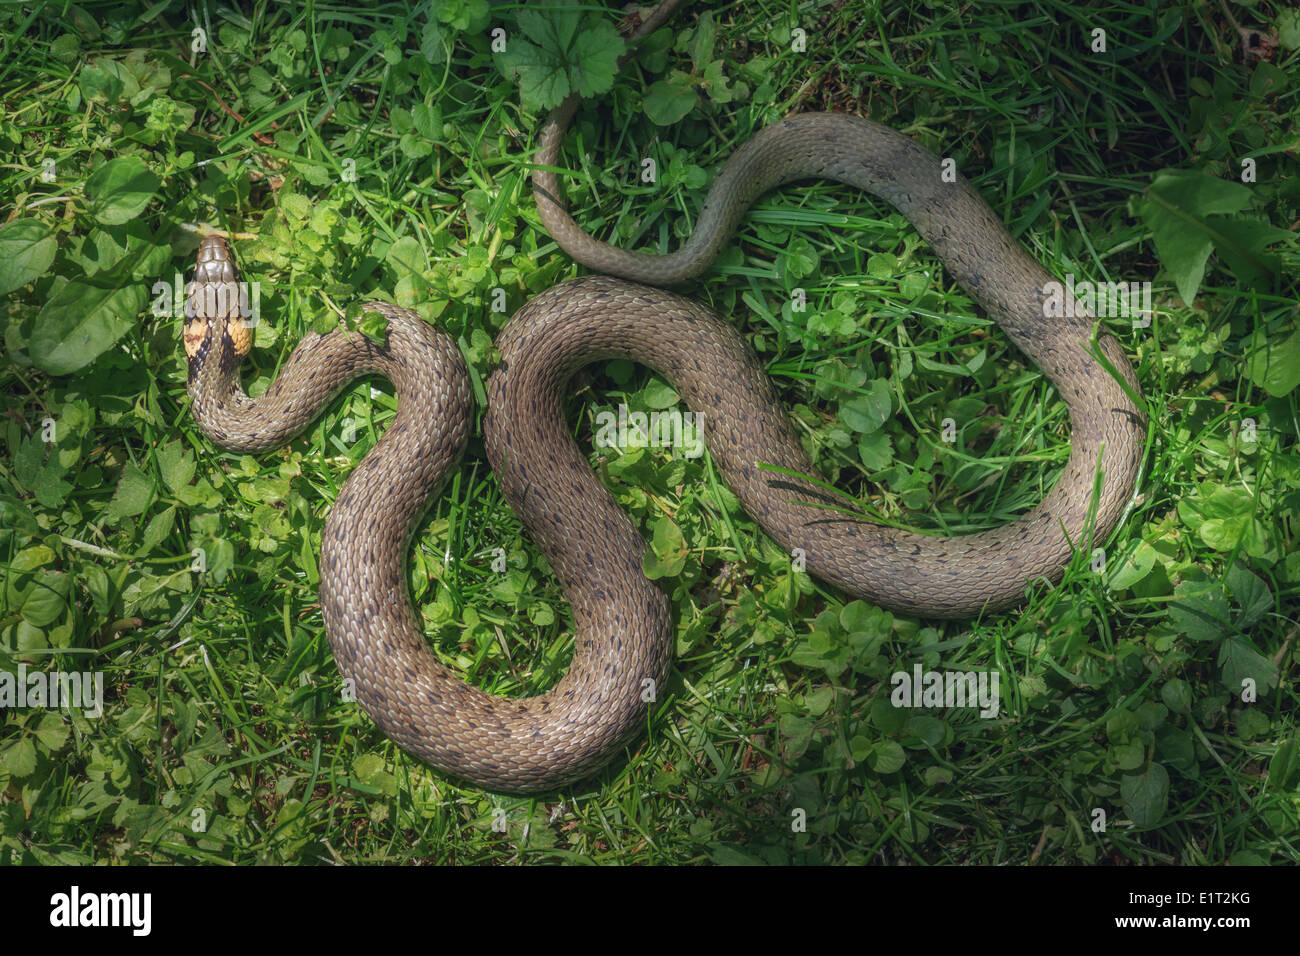 snake on green grass close up Stock Photo